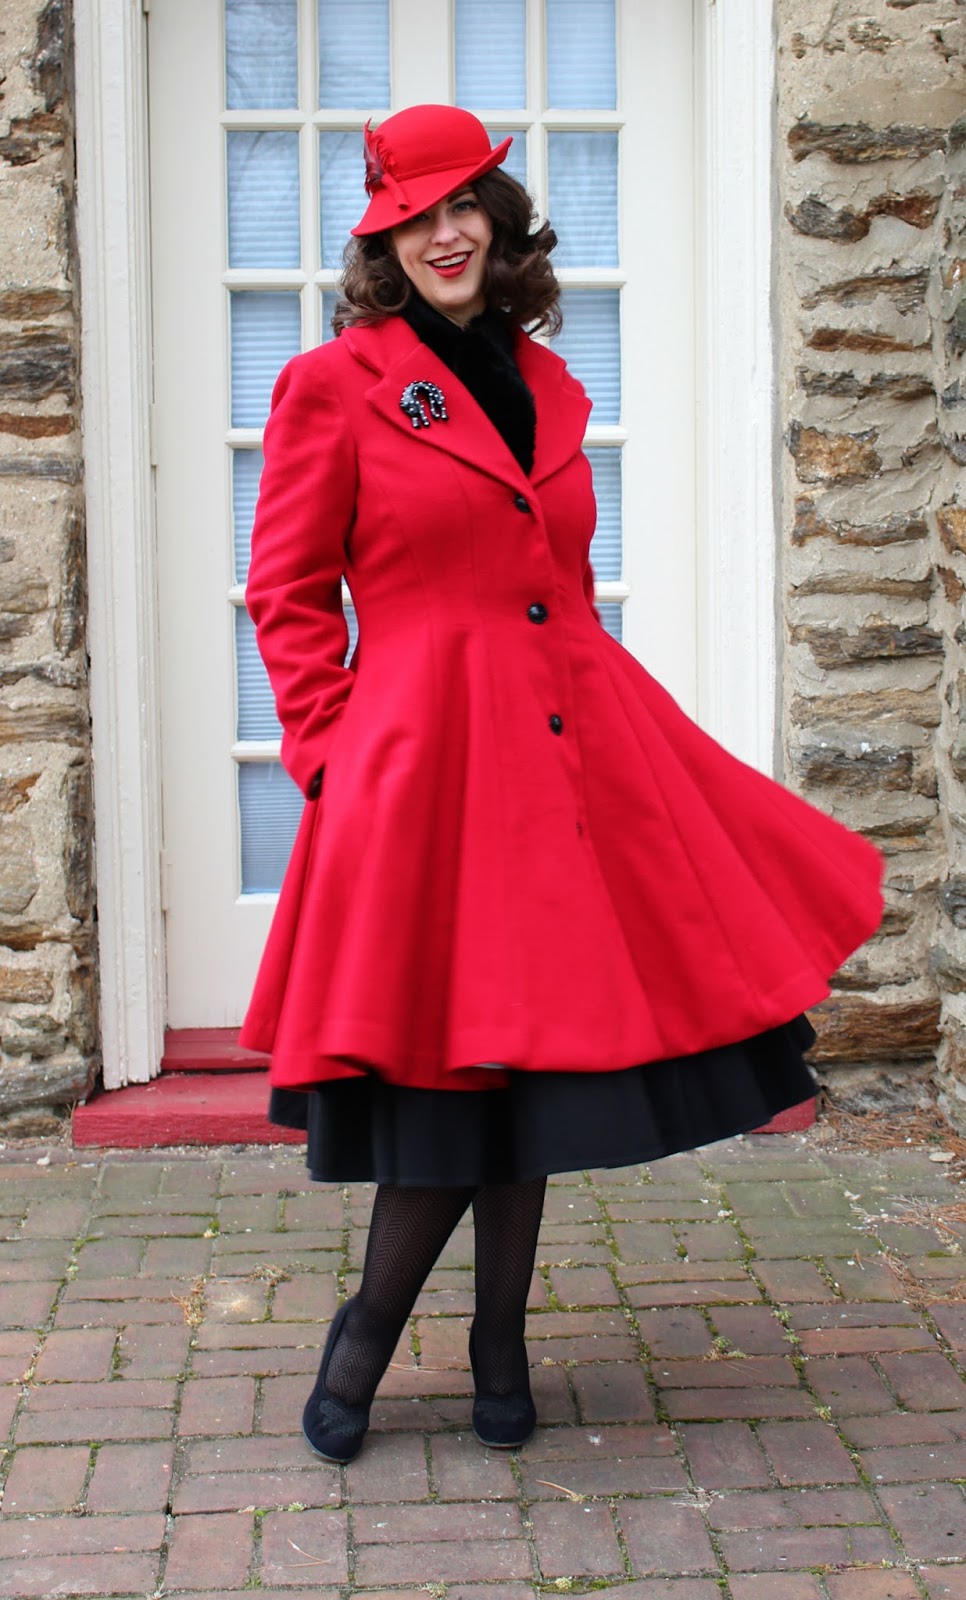 Handmade By Heather B: Lady in Red - McCalls 6800